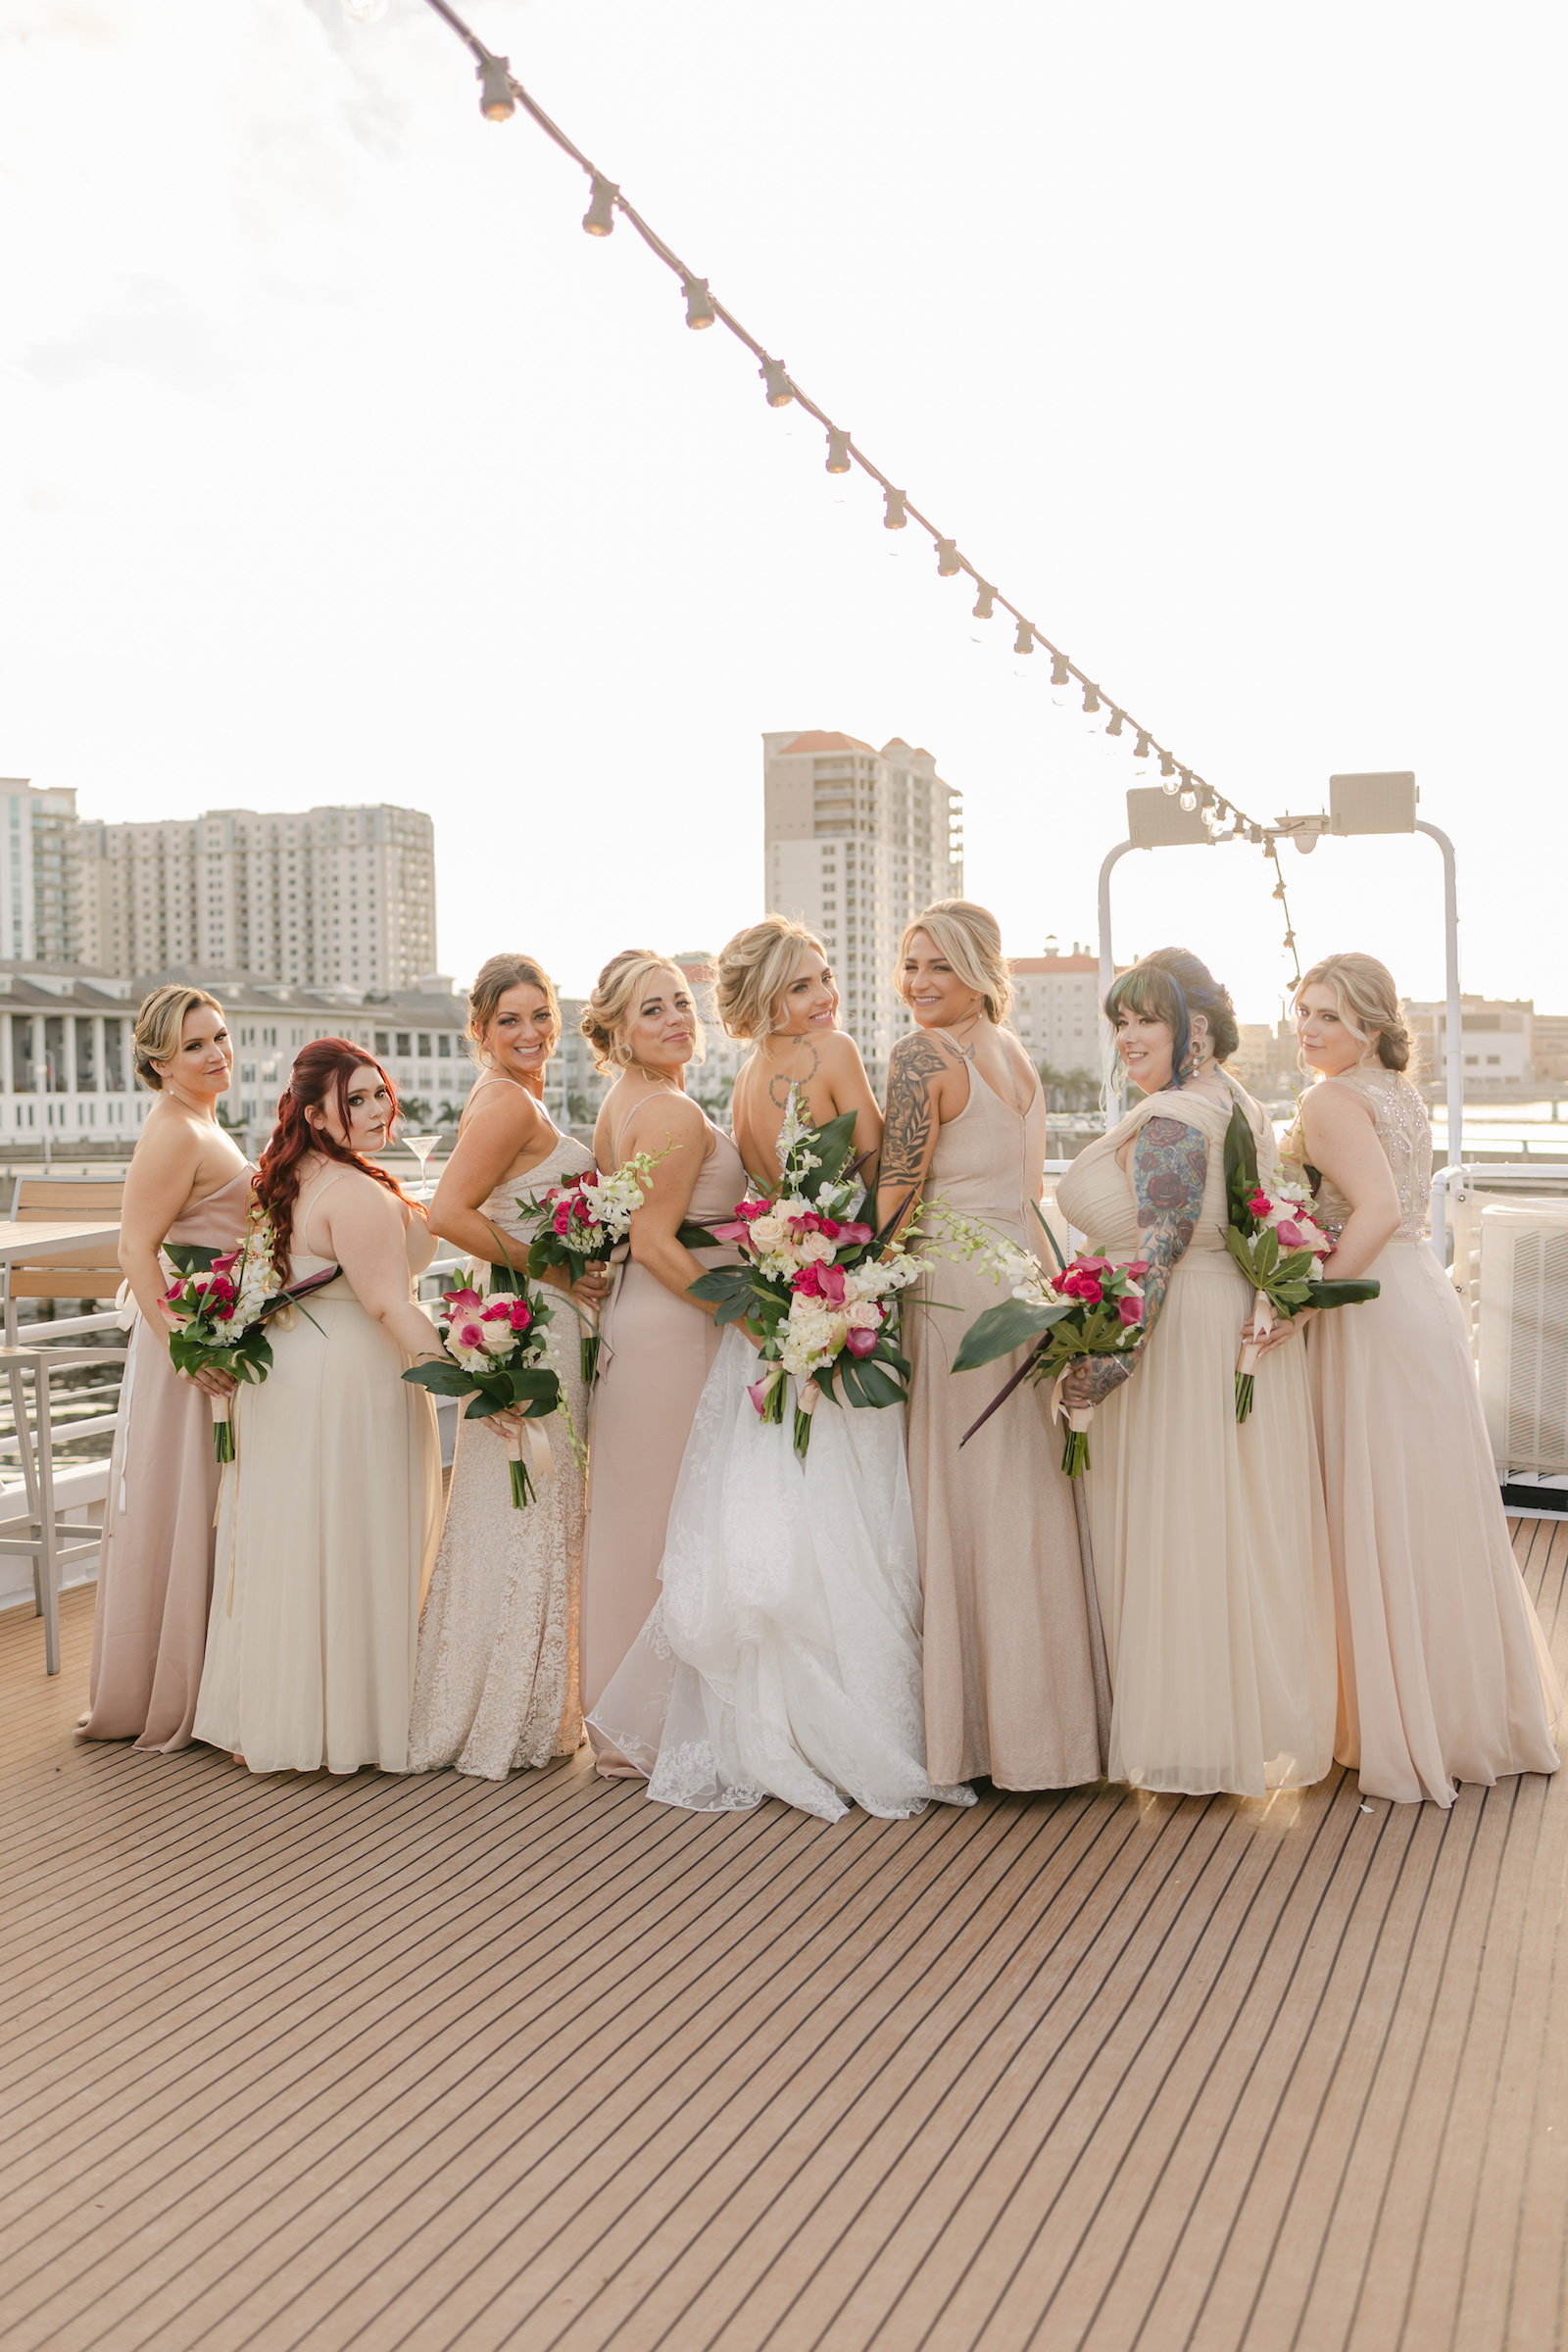 Bride and Bridesmaids in Mix and Match Tropical, pink, white, yellow, Sand Dresses Holding | The Yacht StarShip